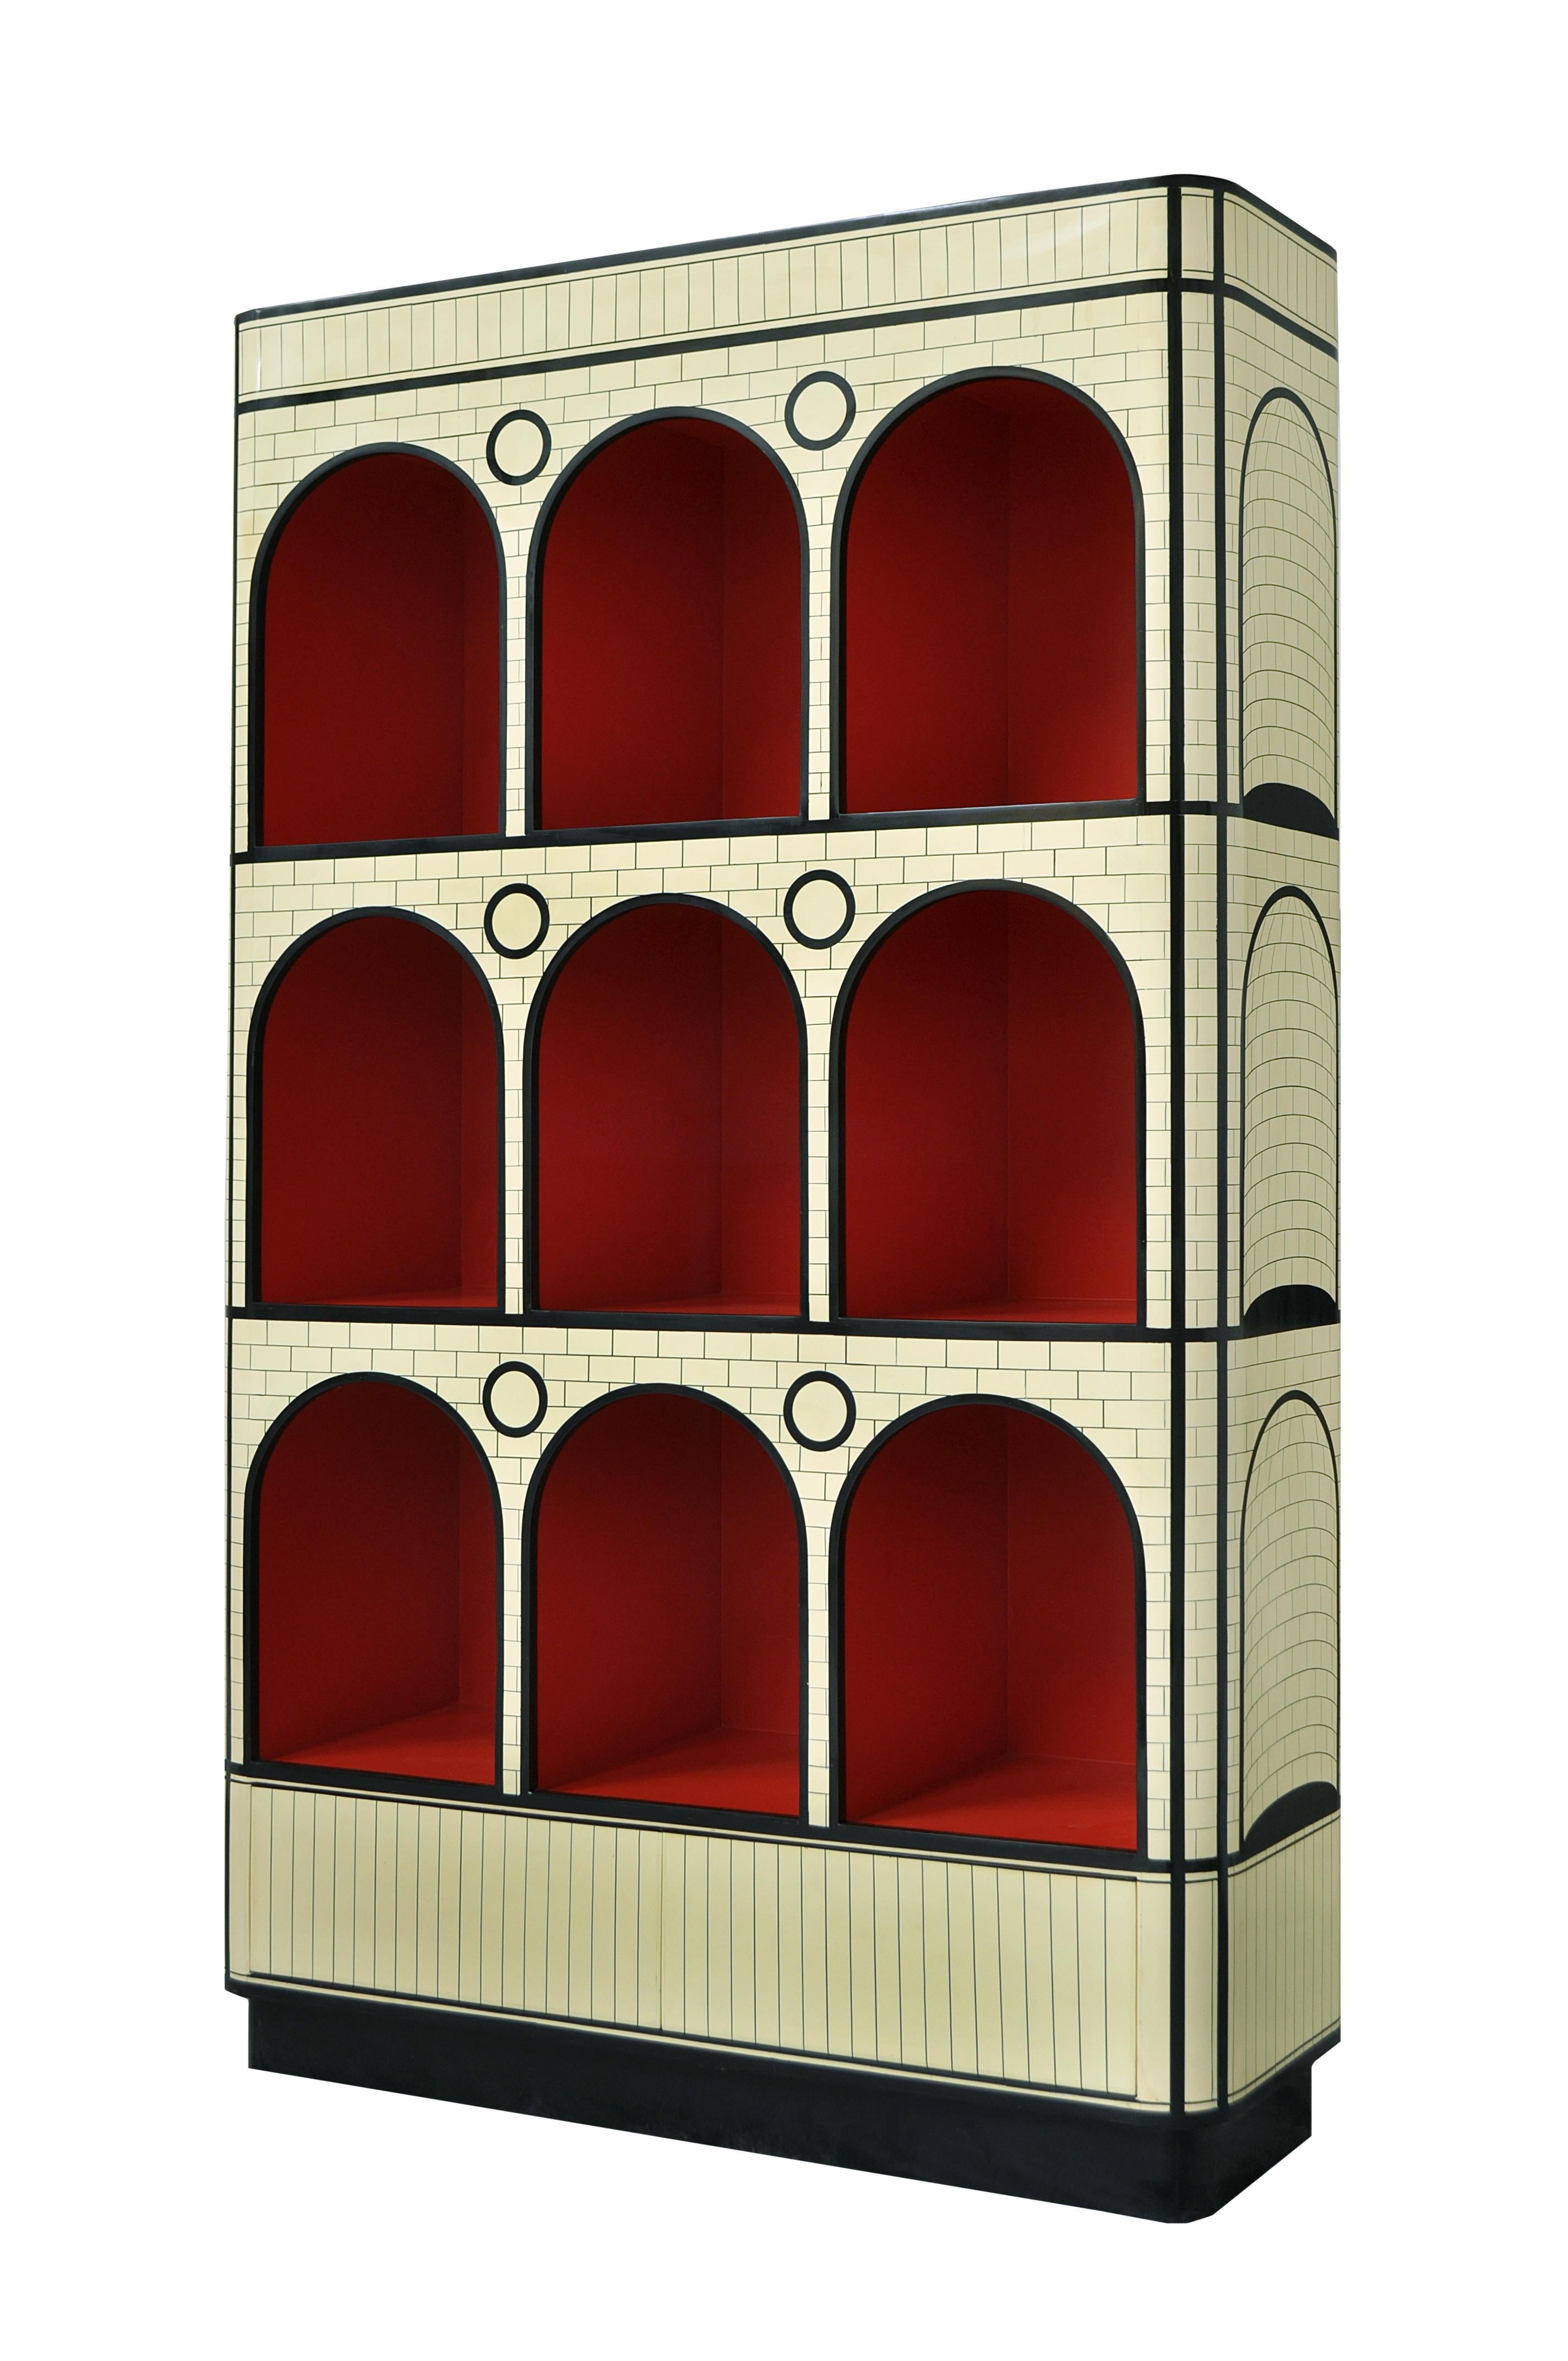 The Count Black and White Showcase Cabinet by Matteo Cibic is a tall impressive display or book cabinet.

India's handicrafts are as multifarious as its cultures, and as rich as its history. The art of bone and Horn inlay is omnipresent here.